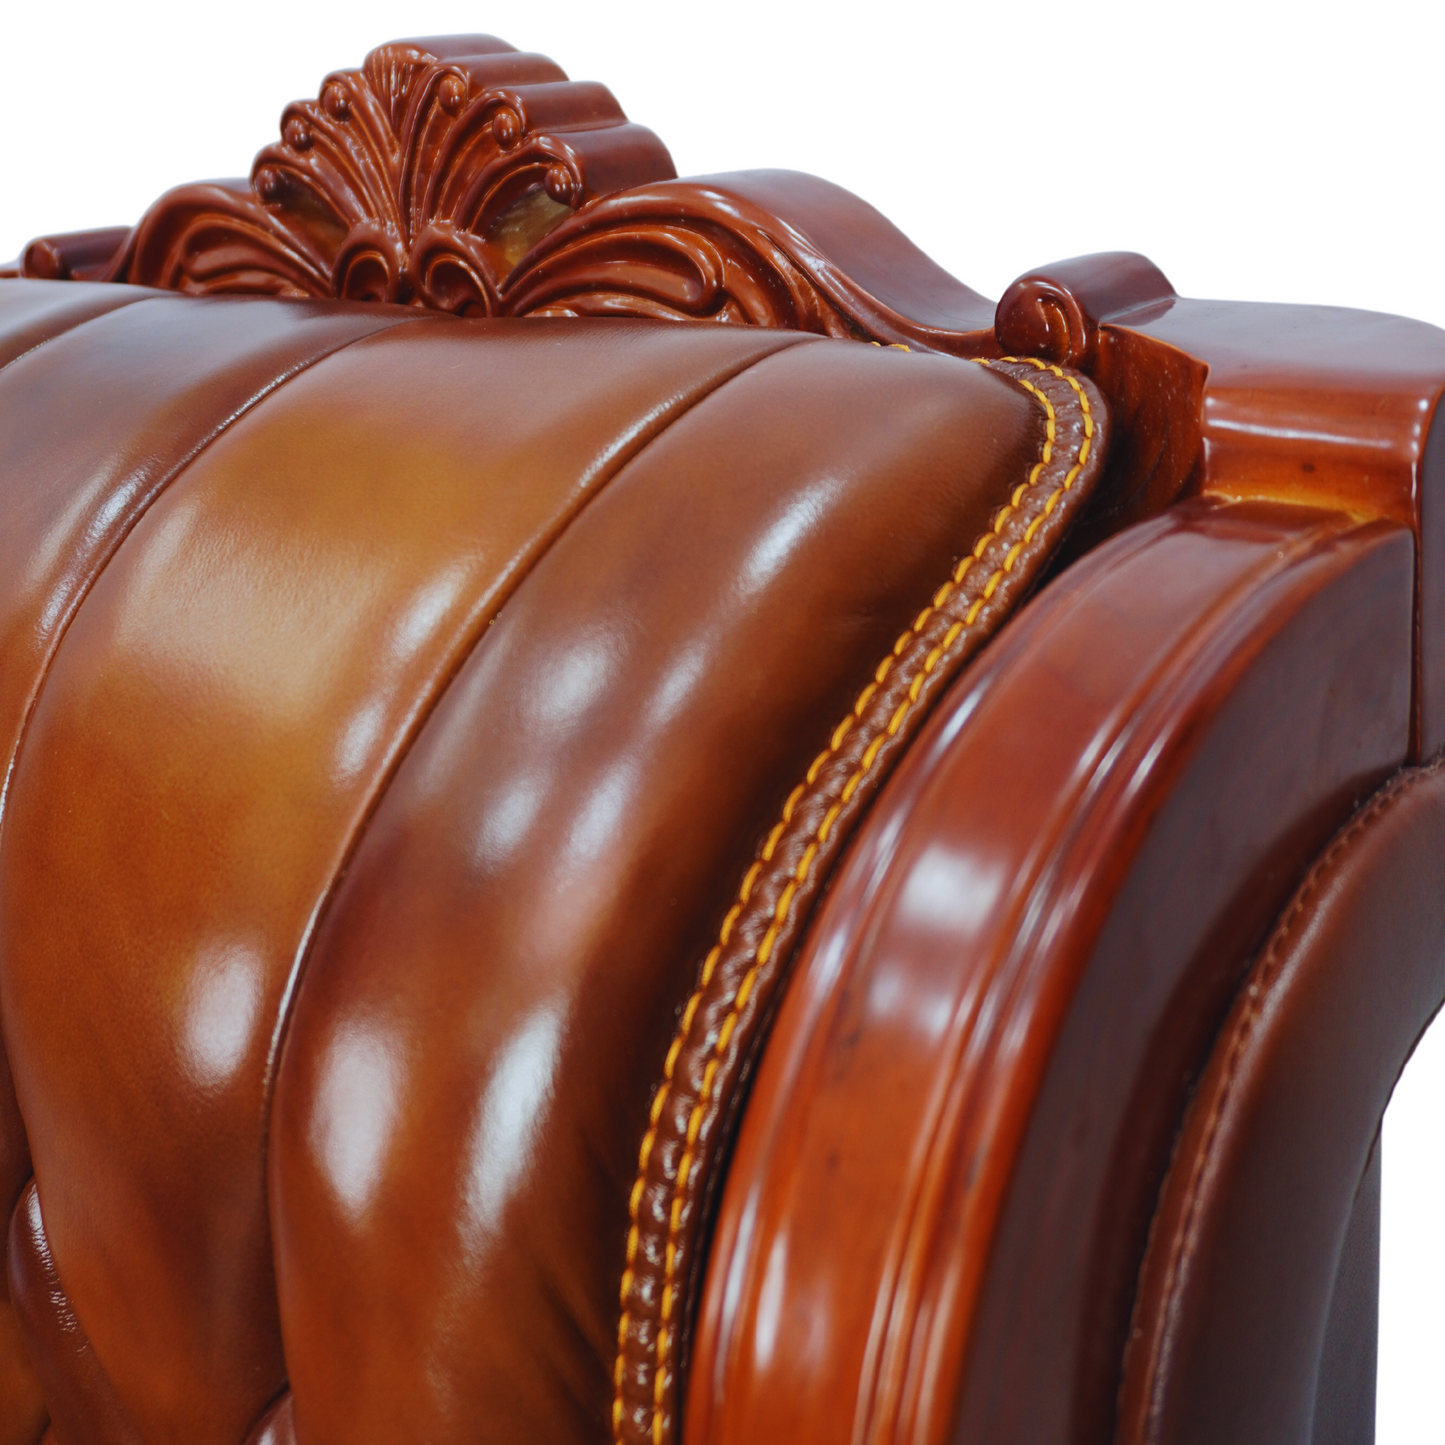 Royal Cowhide Leather Boss Chair (FT-BSC001)